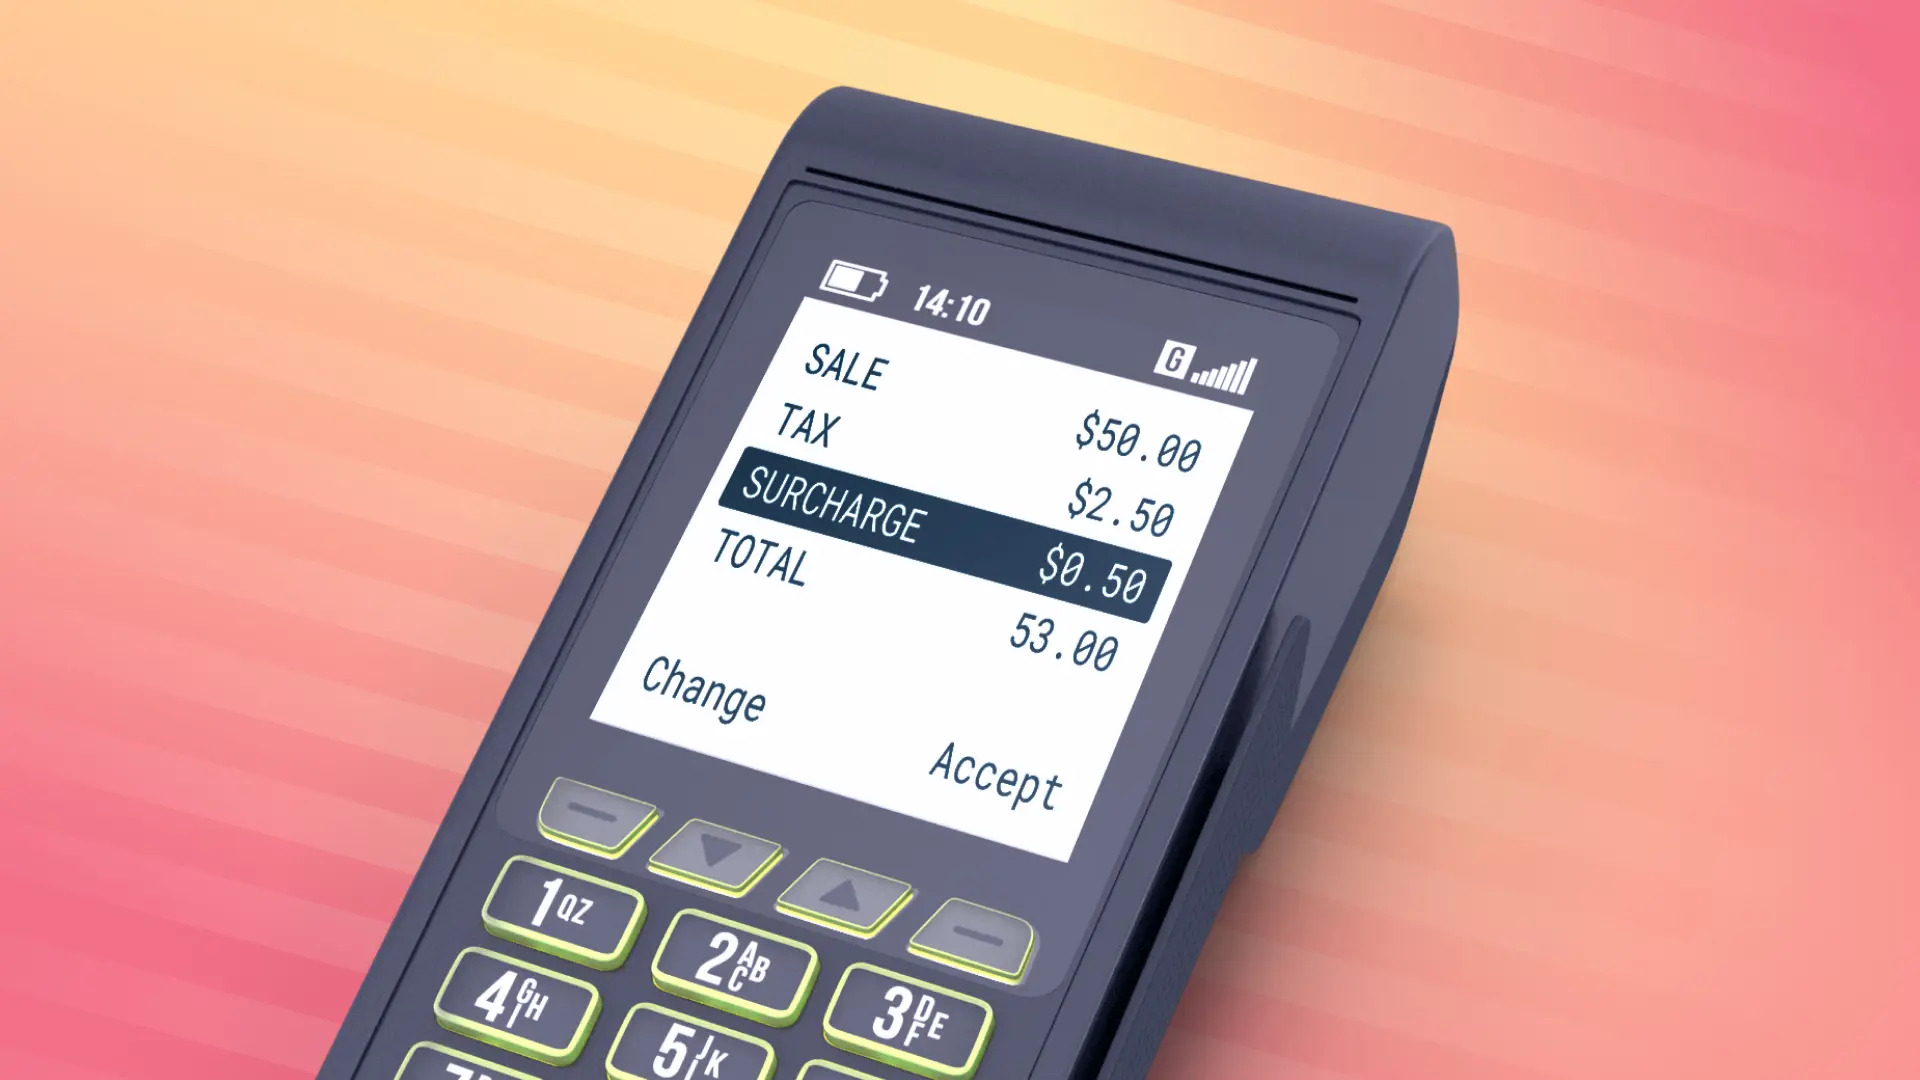 Cardreader with itemized costs and surcharge fee listed. Prompt for customer to accept the cost of transaction or change payment method. Orange and pink gradient in the background.